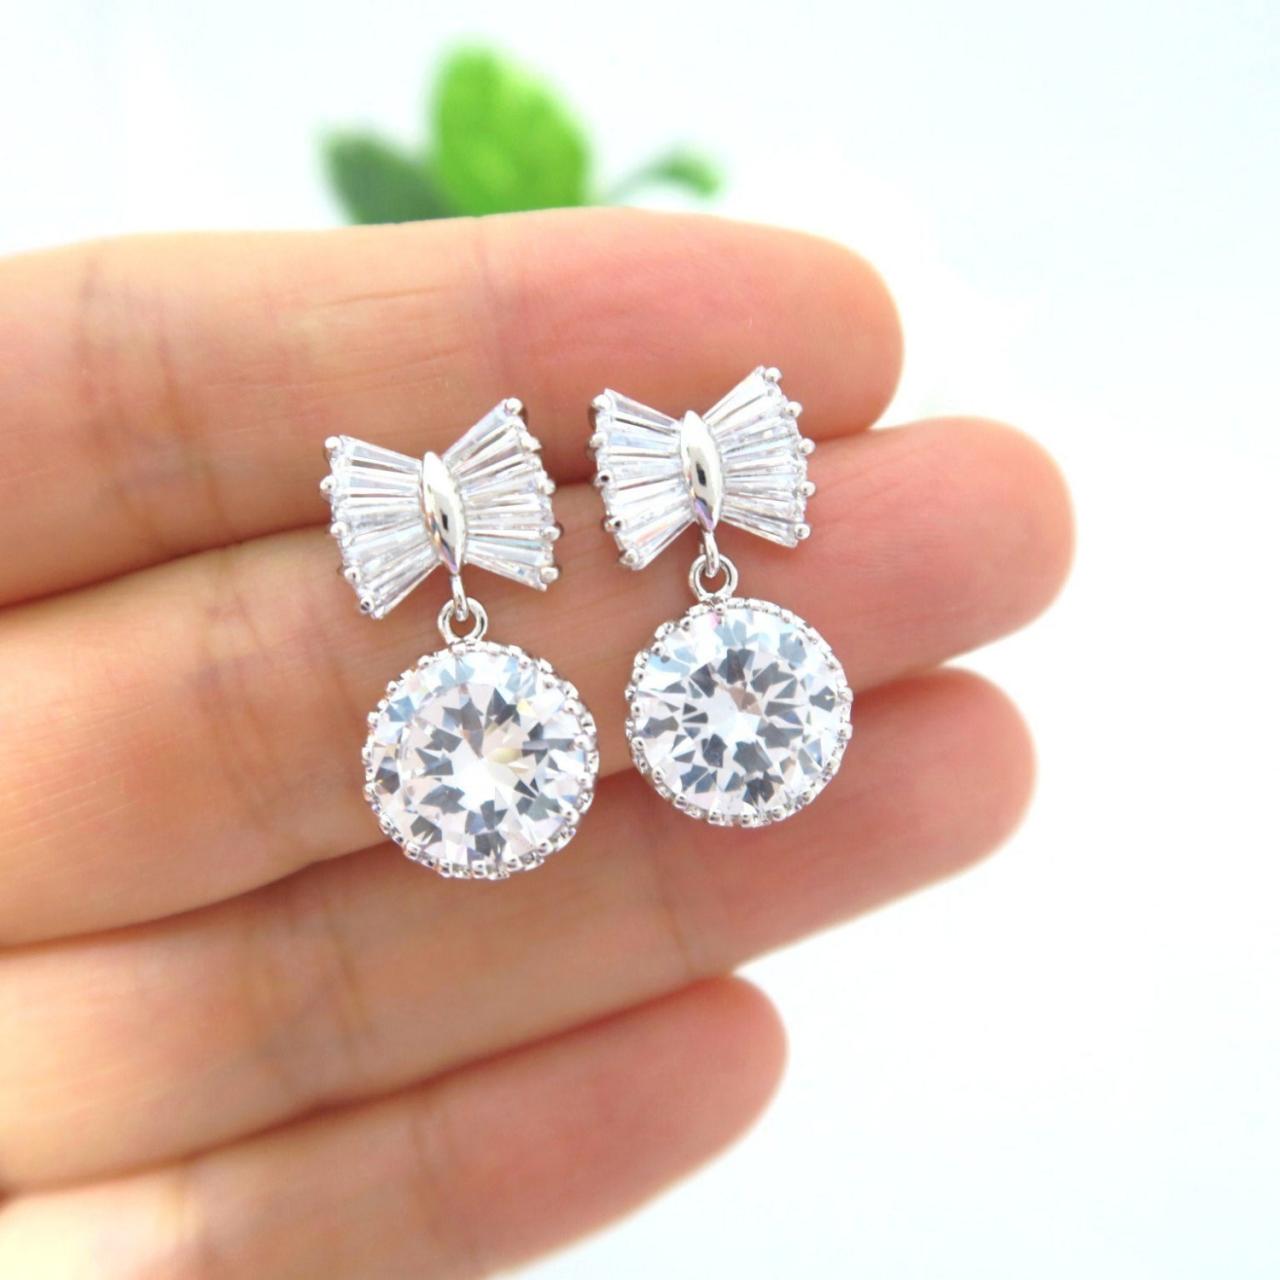 Ribbon Bow Cubic Zirconia Round Crystal Earrings Wedding Jewelry Bridesmaid Gift Birthday Gift (e185)